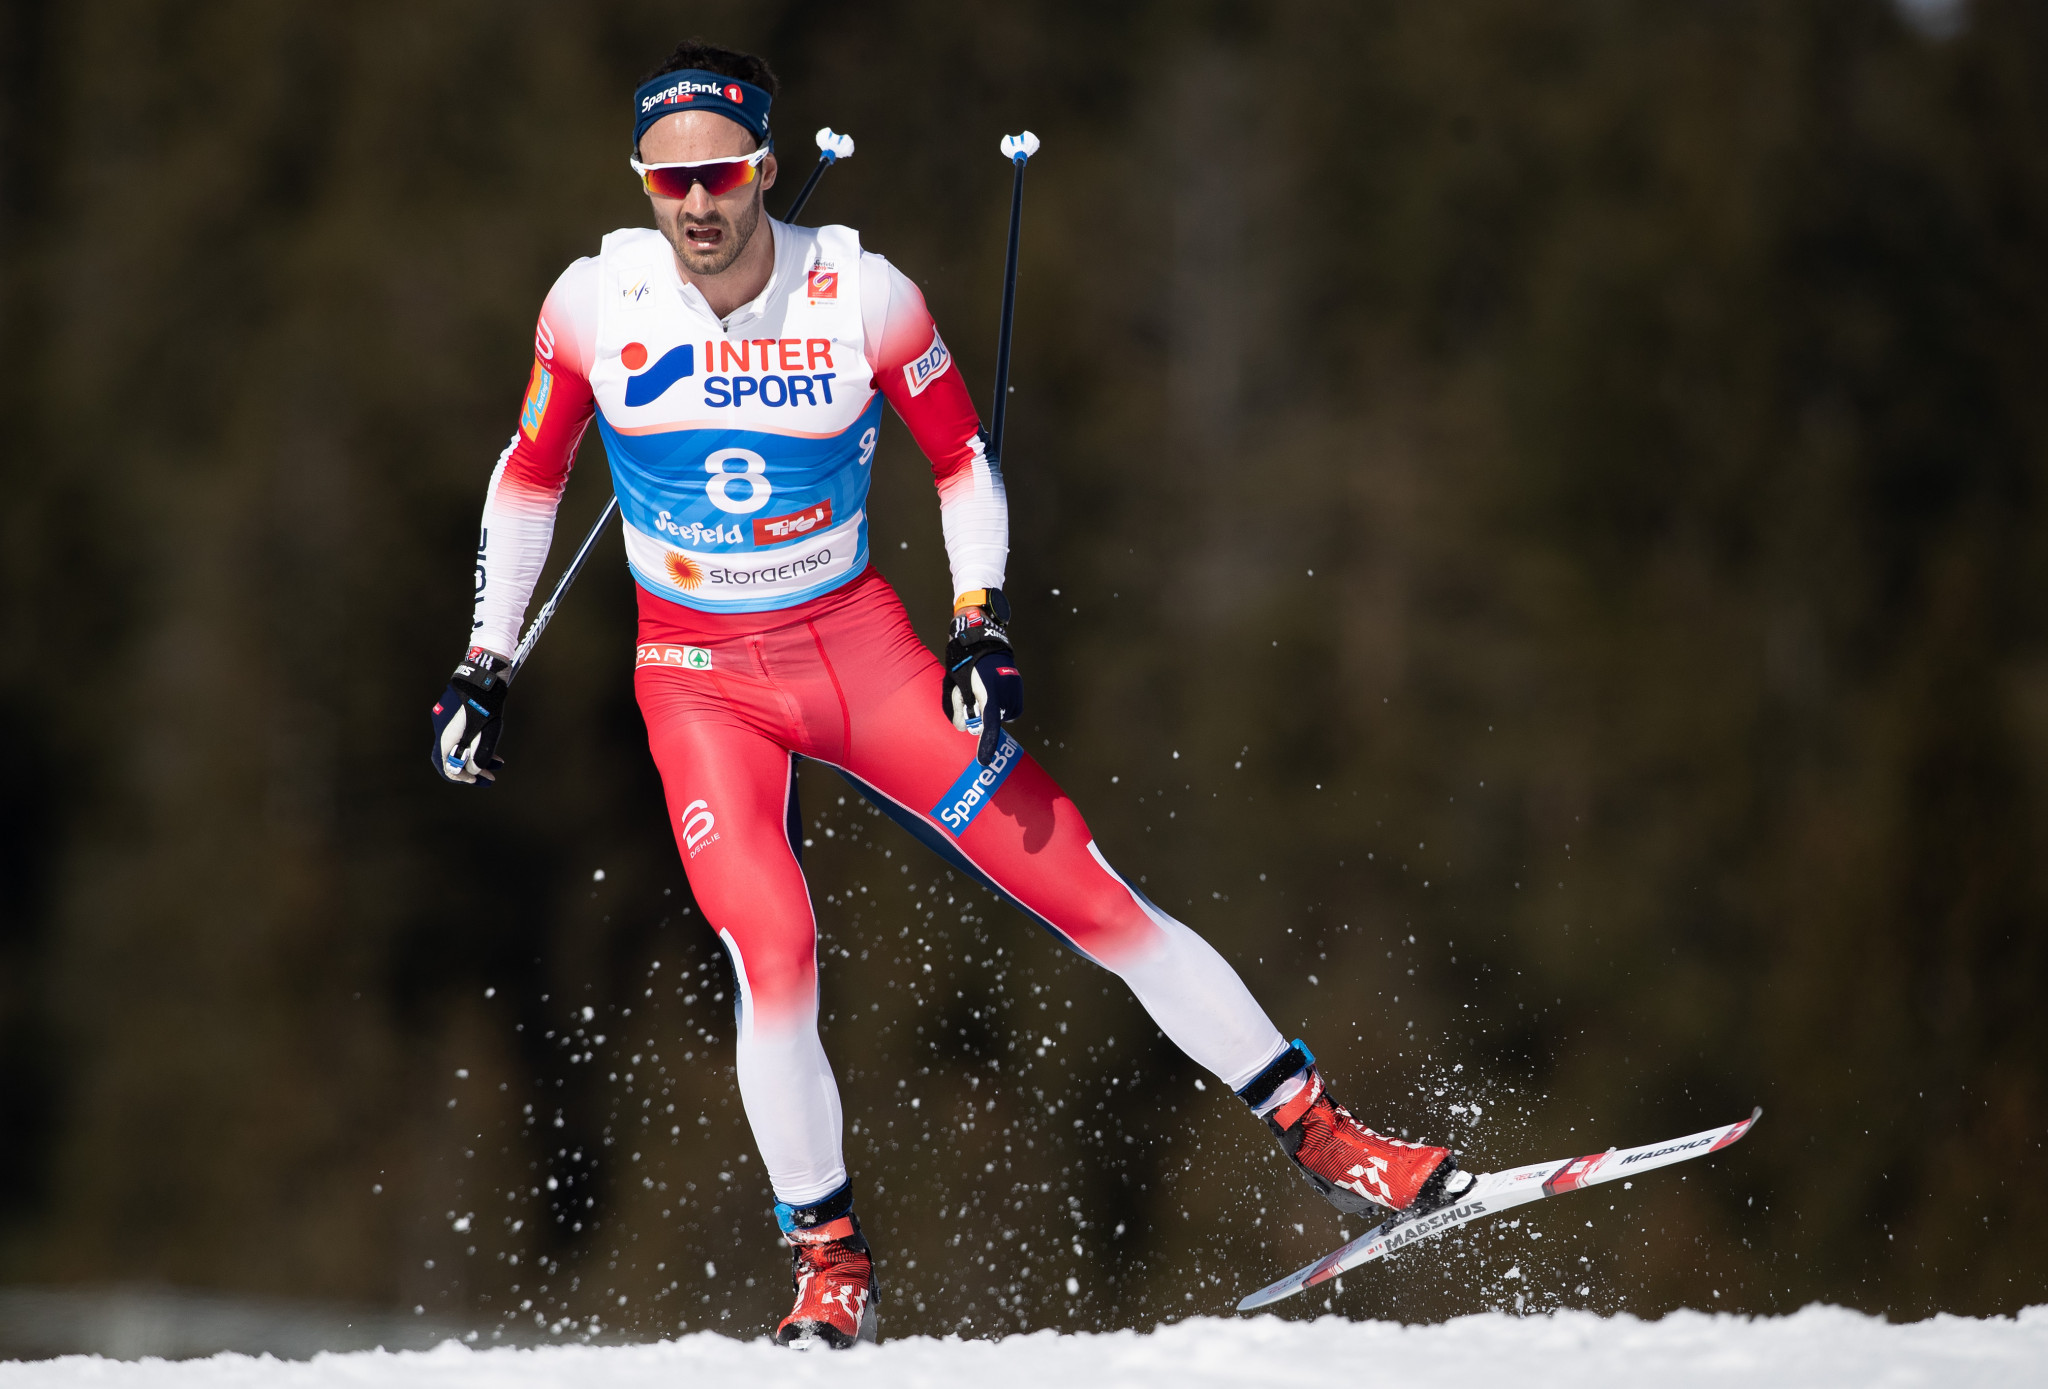 Holund completes cross-country clean sweep for Norwegian men as FIS Nordic World Ski Championships conclude